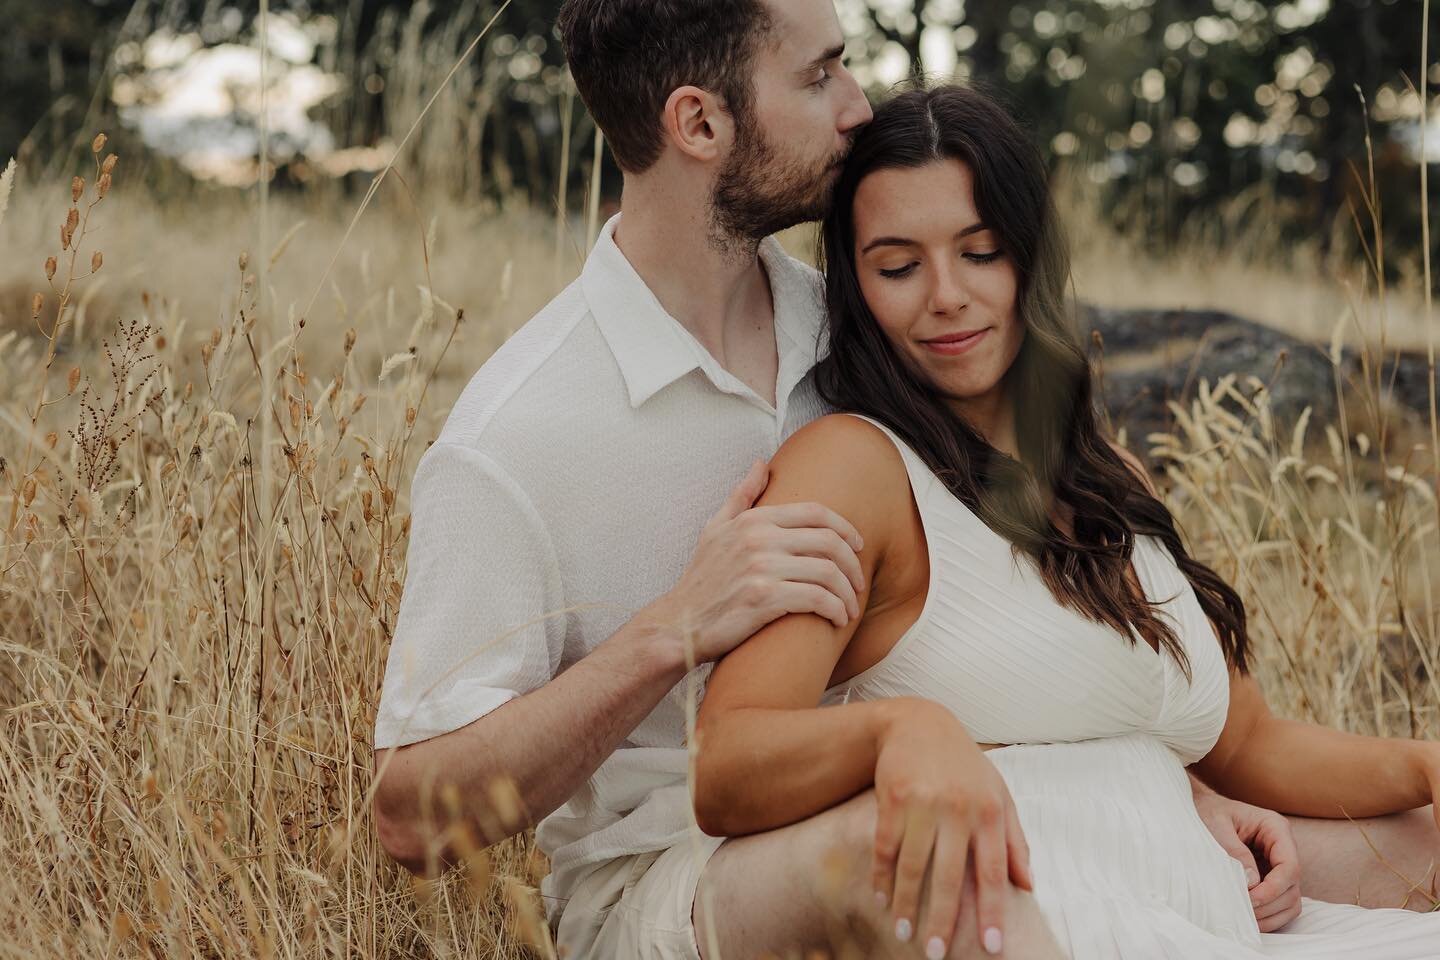 Engagement season is upon us and I can&rsquo;t wait to capture your story! Enjoy 15% off any of my engagement packages upon booking your wedding with me. Inquire through the link in my website to learn more! 🌟

Featuring Olimpia &amp; Zach at Mount 